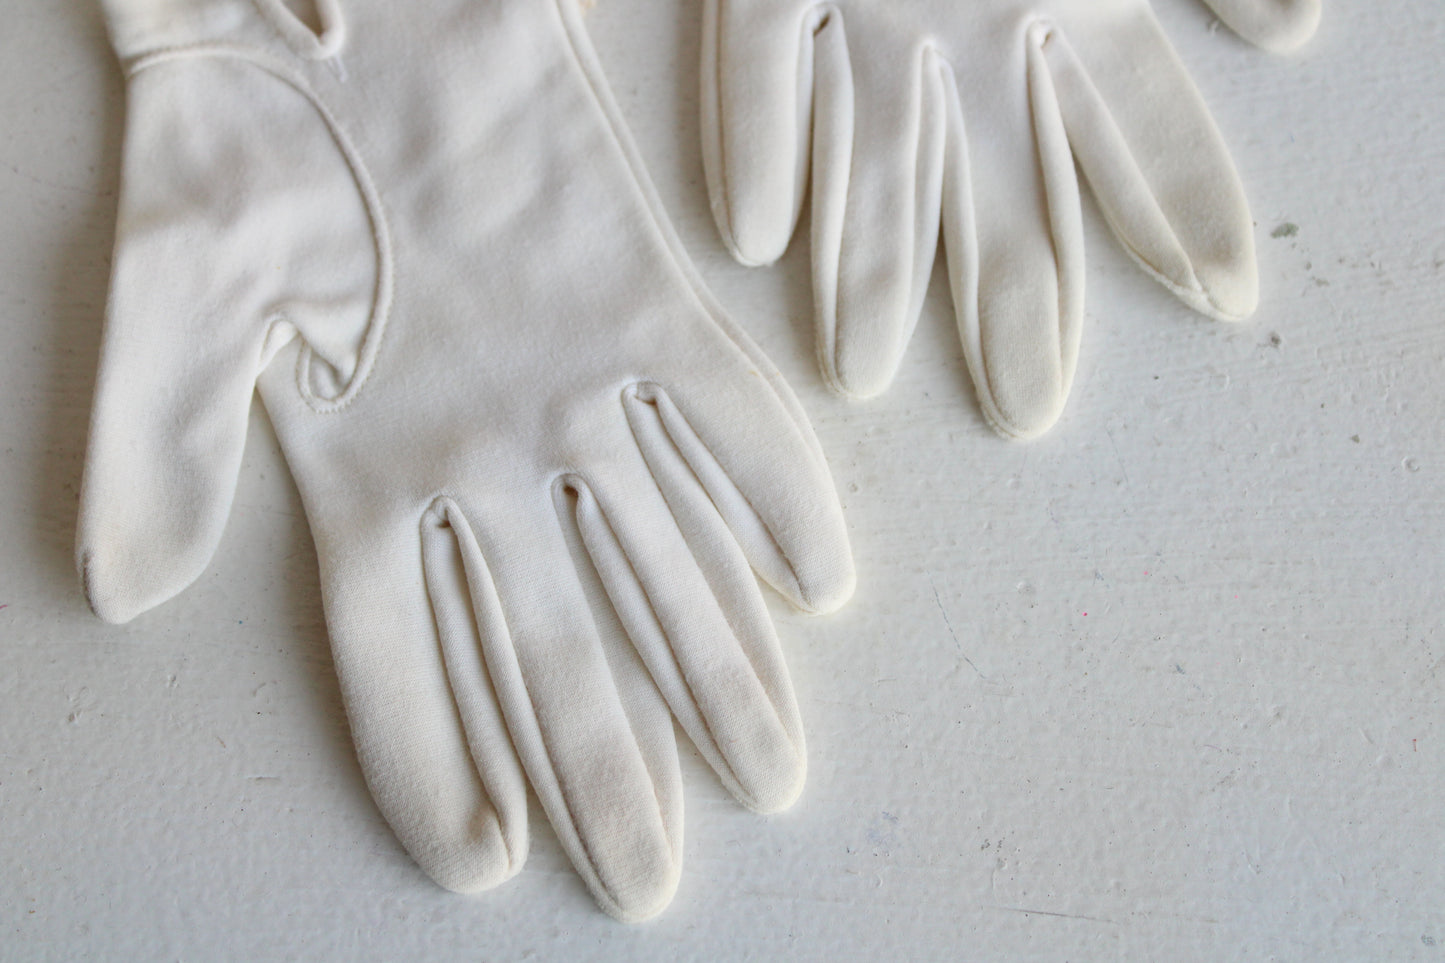 Vintage 1950s 1960s Gloves with Daisies